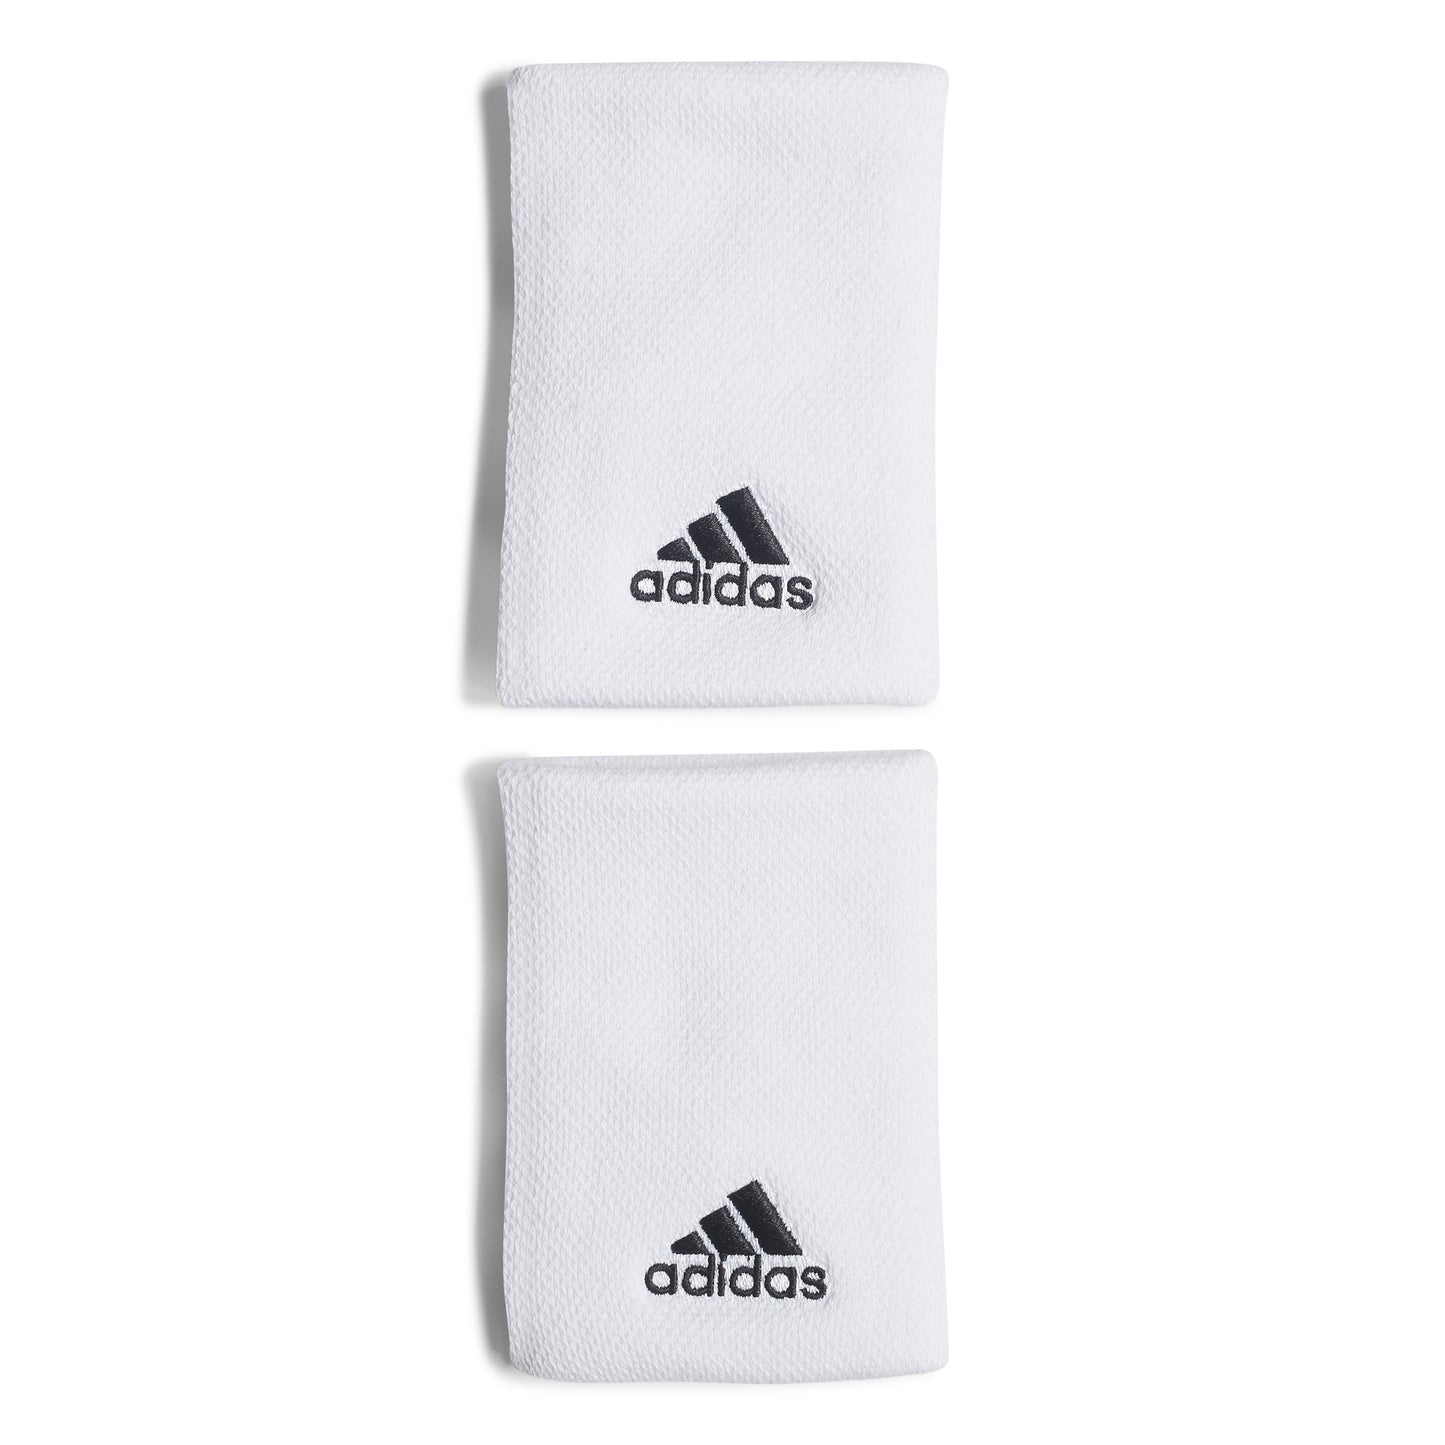 Adidas Interval Large Wristbands - White/Black HD9127